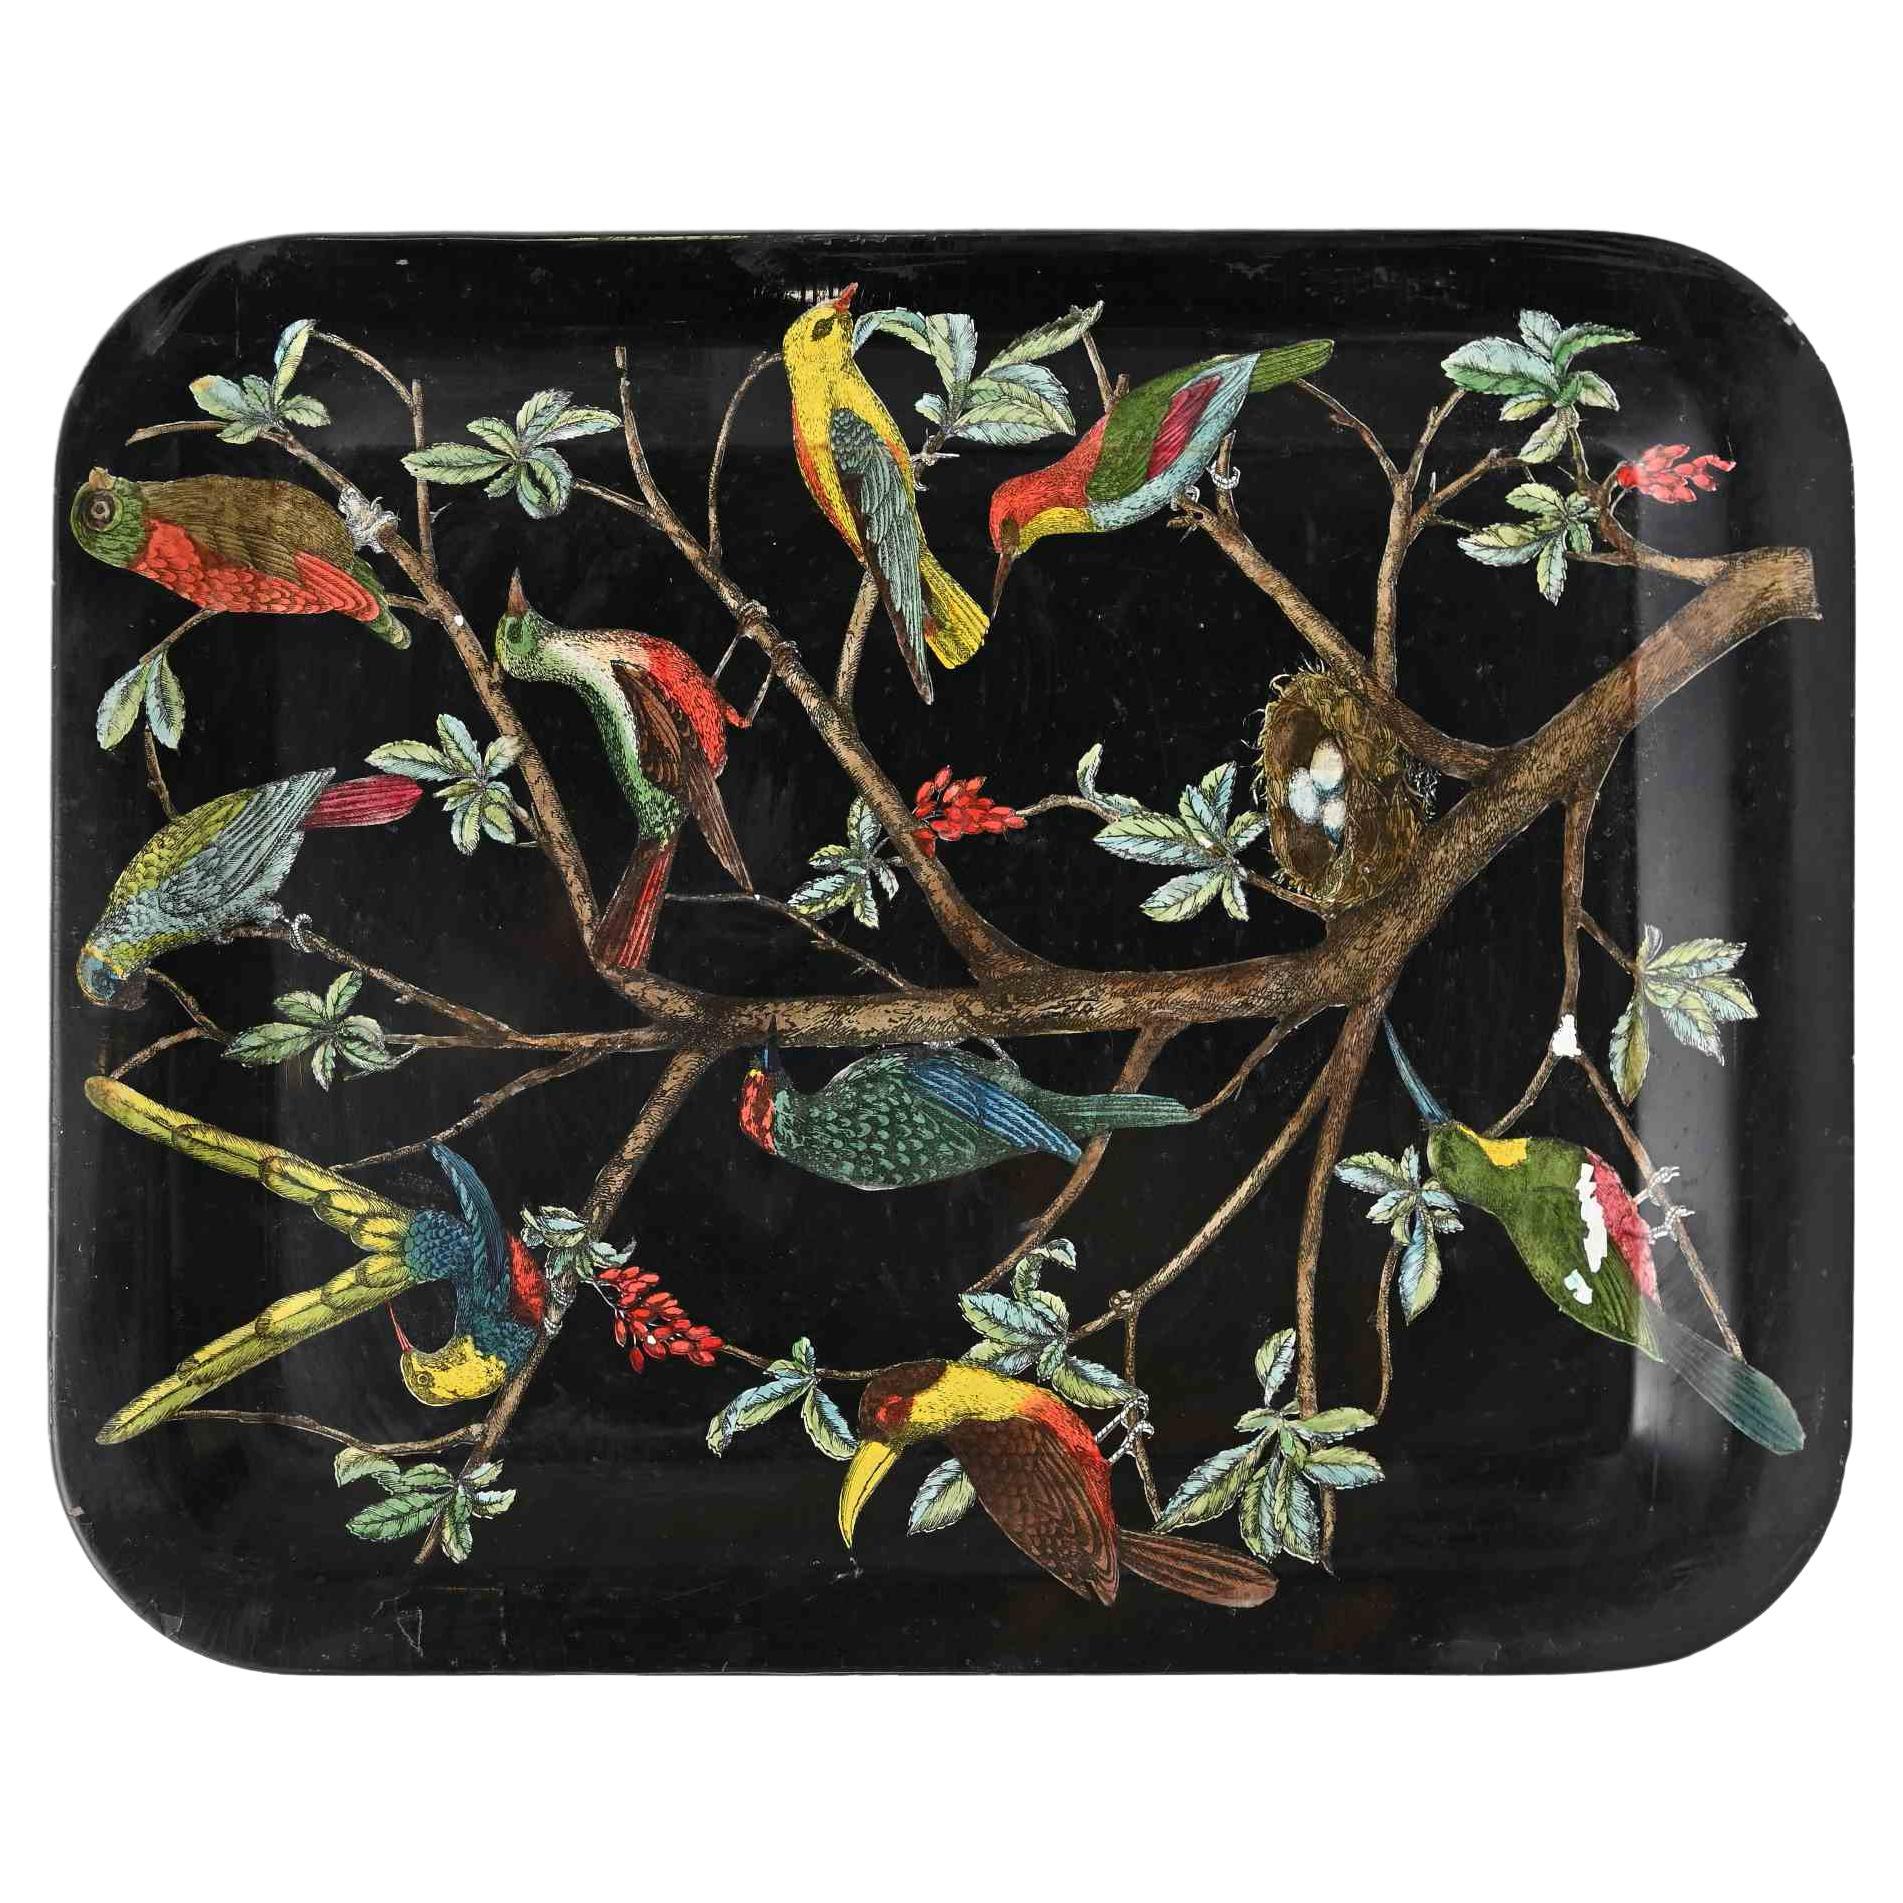 Serving Tray with Birds by Piero Fornasetti, 1950s